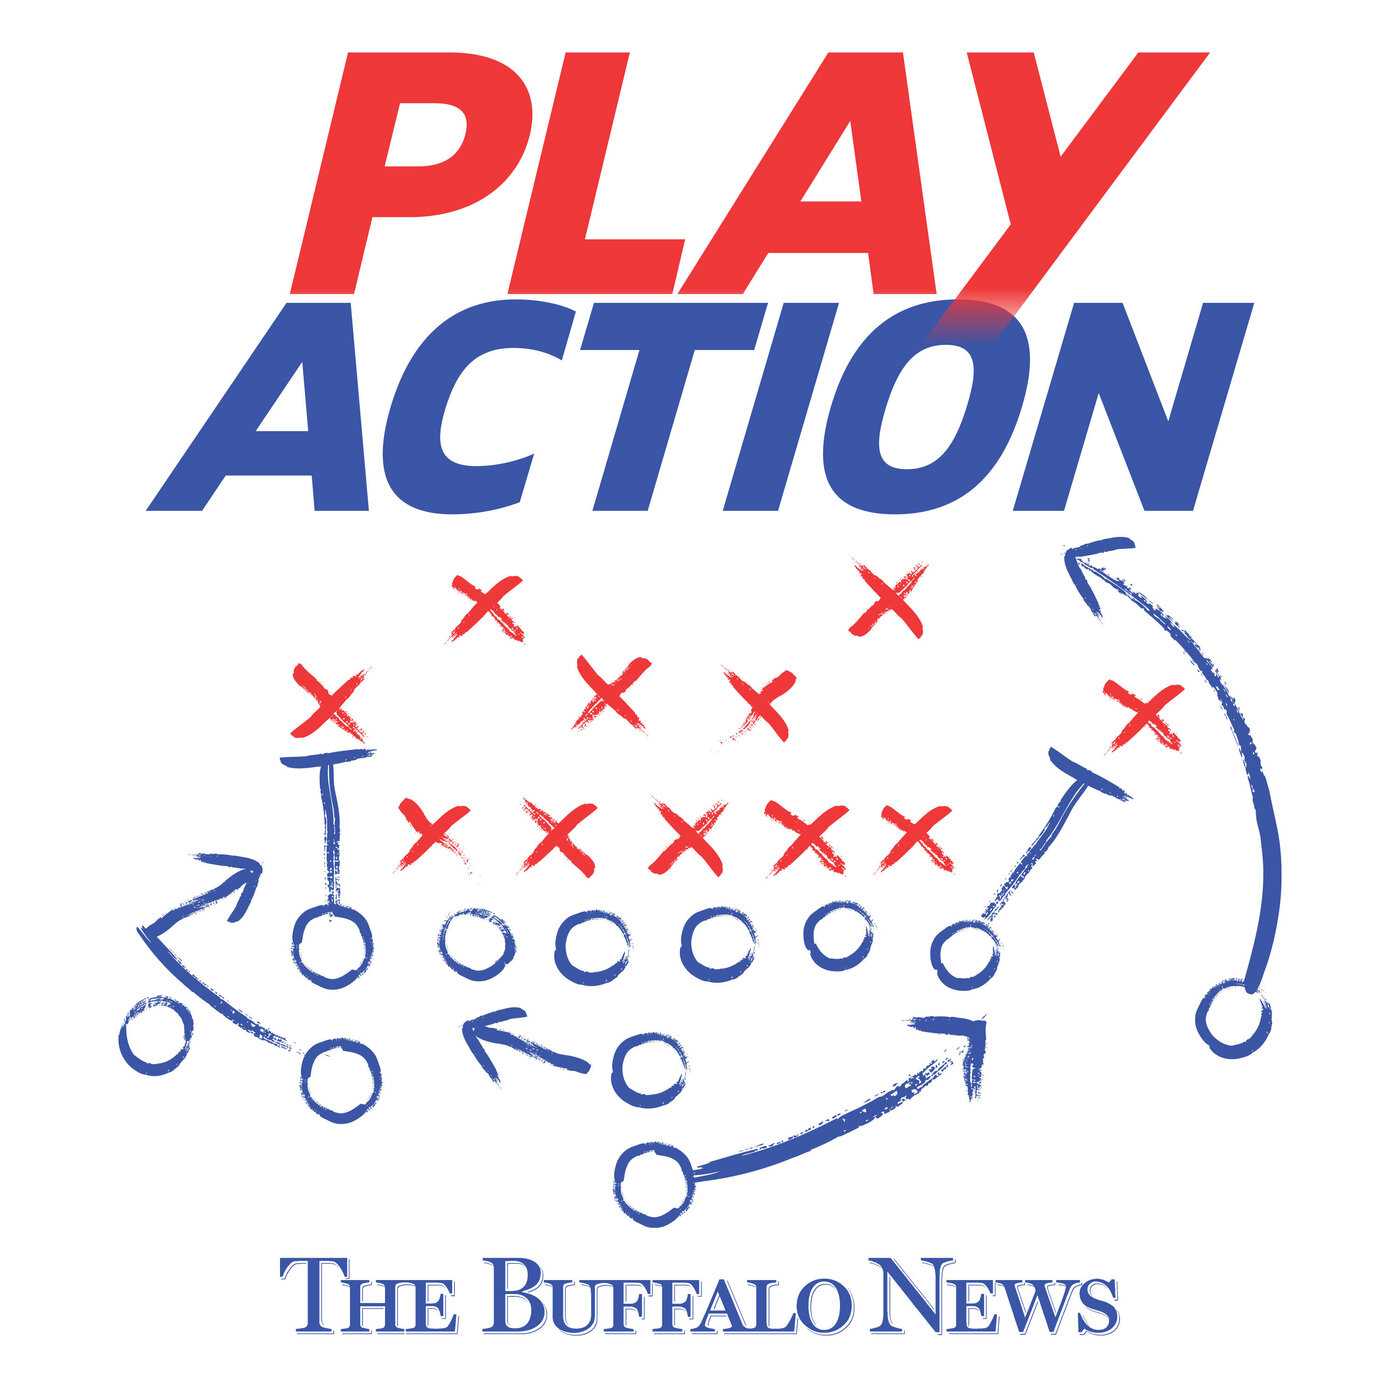 A season defining game for Josh Allen and the Bills offense